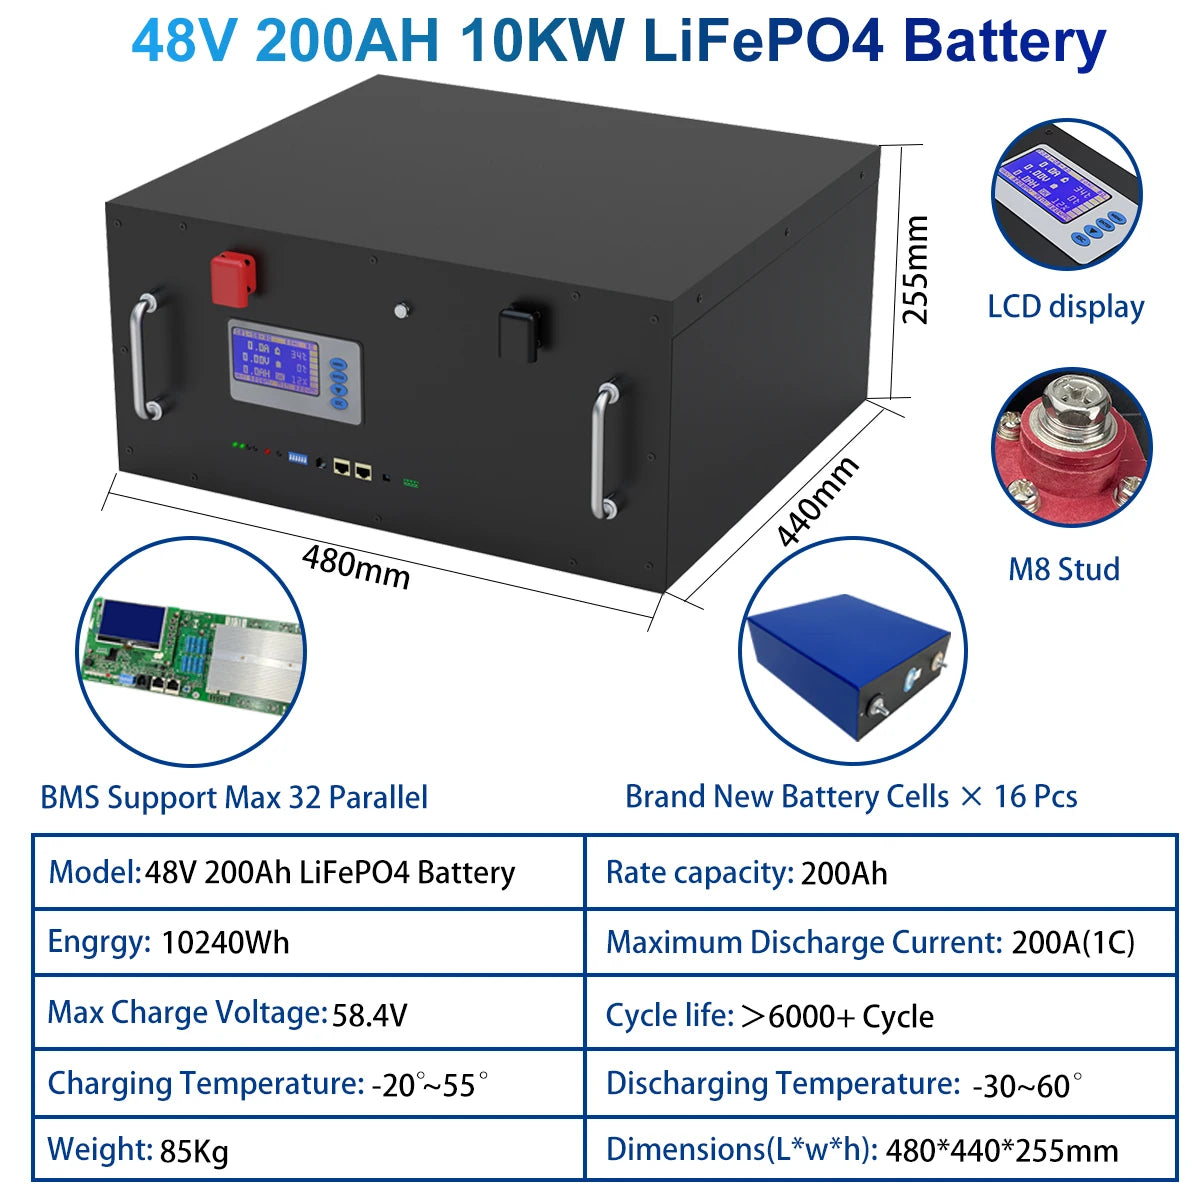 48V 200Ah LiFePO4 Battery, High-performance LiFePO4 battery pack with CAN/RS485 communication for large-scale energy storage and industrial use.